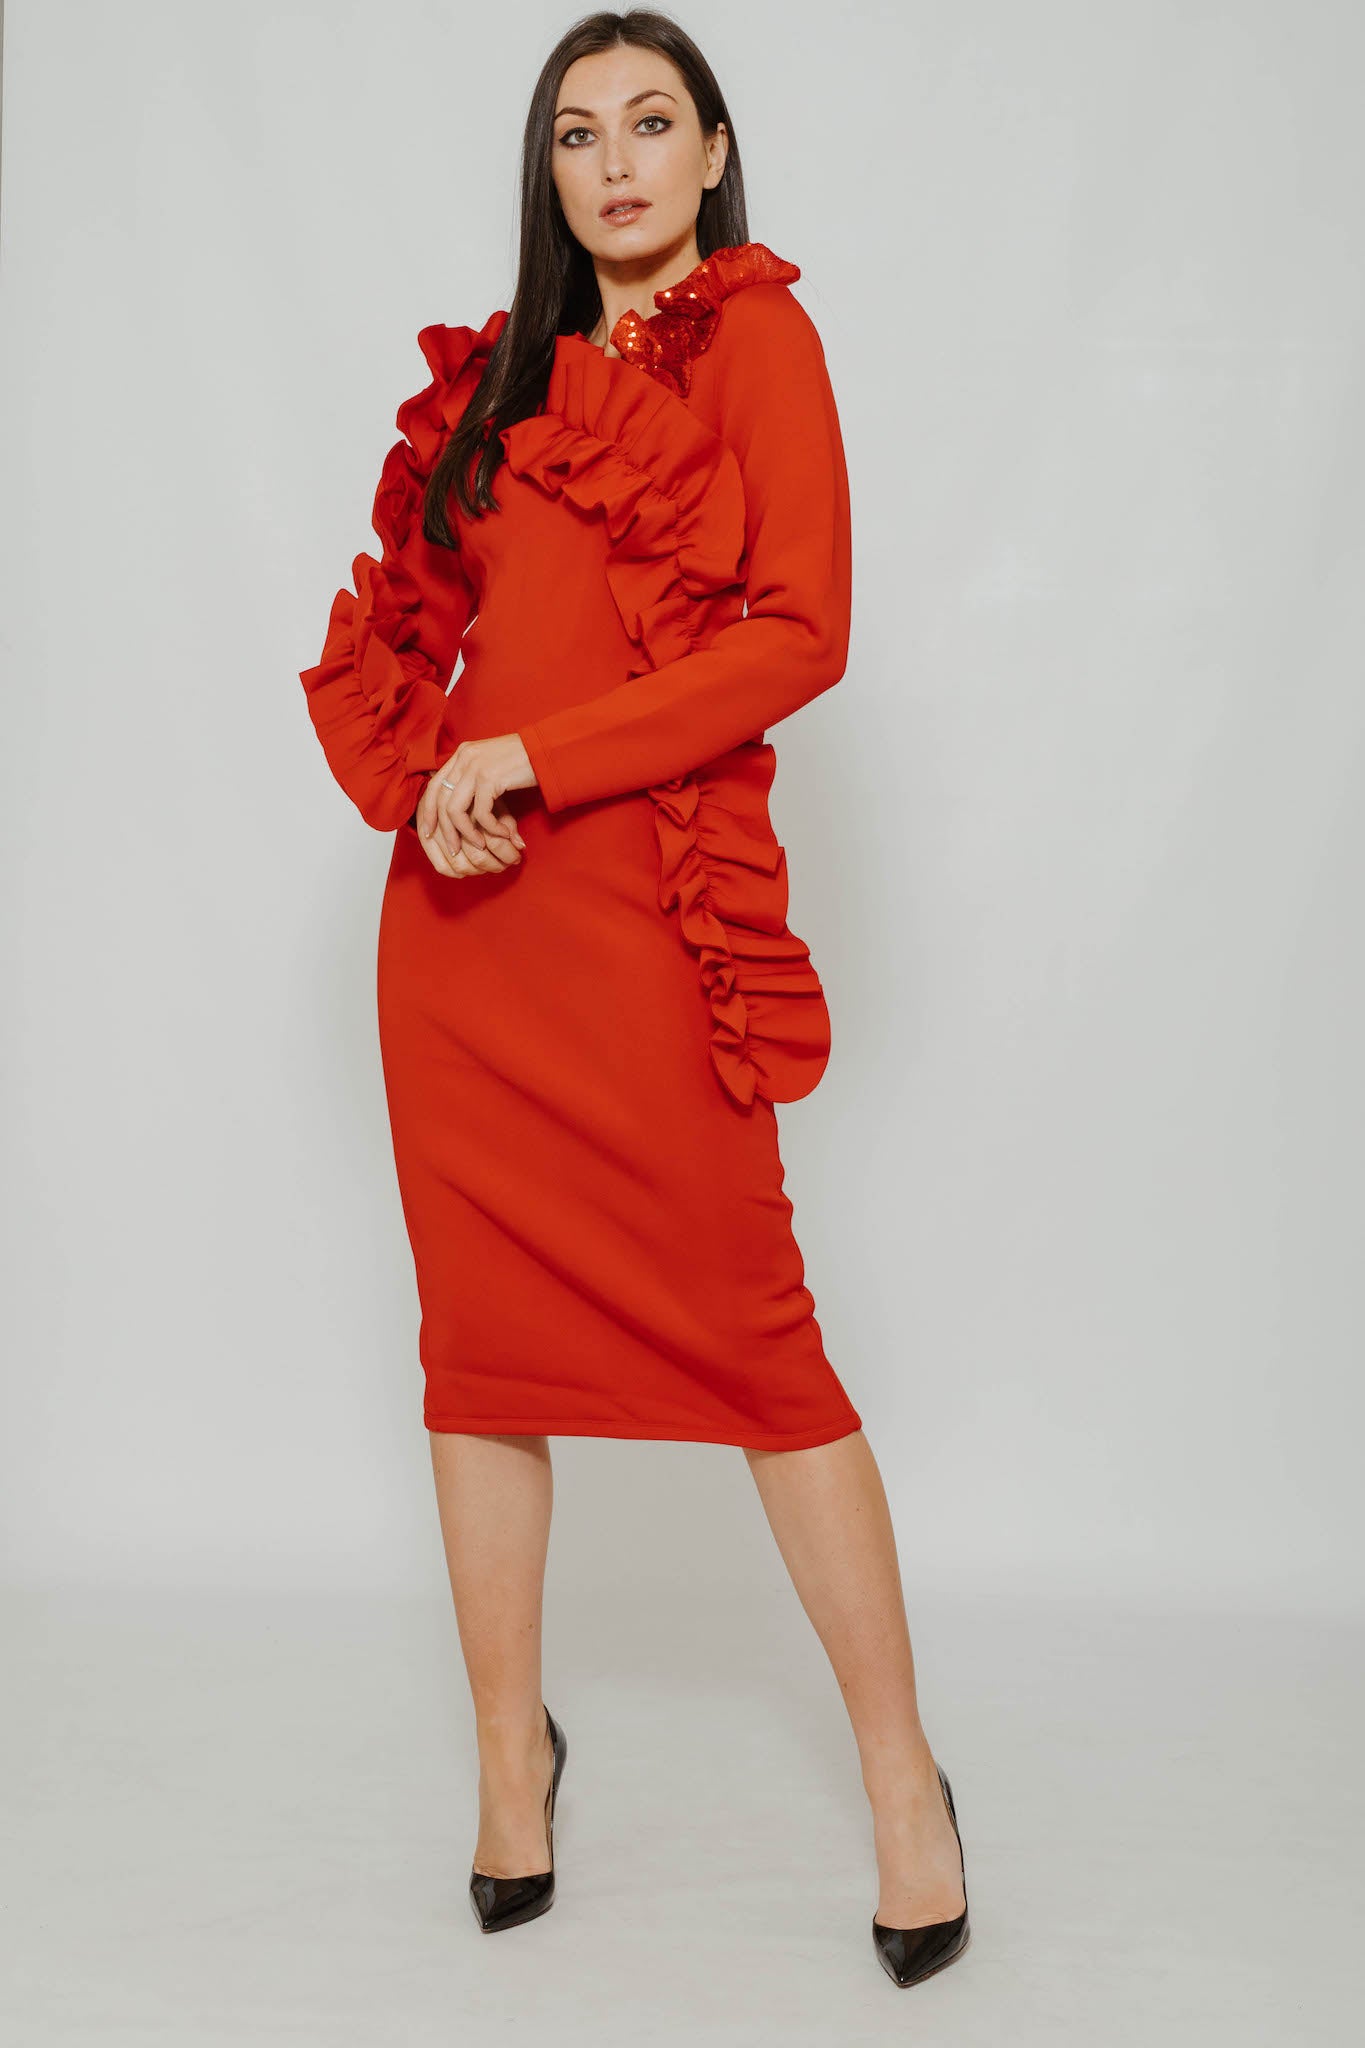 Polly Embellished Ruffle Dress In Red – The Walk in Wardrobe